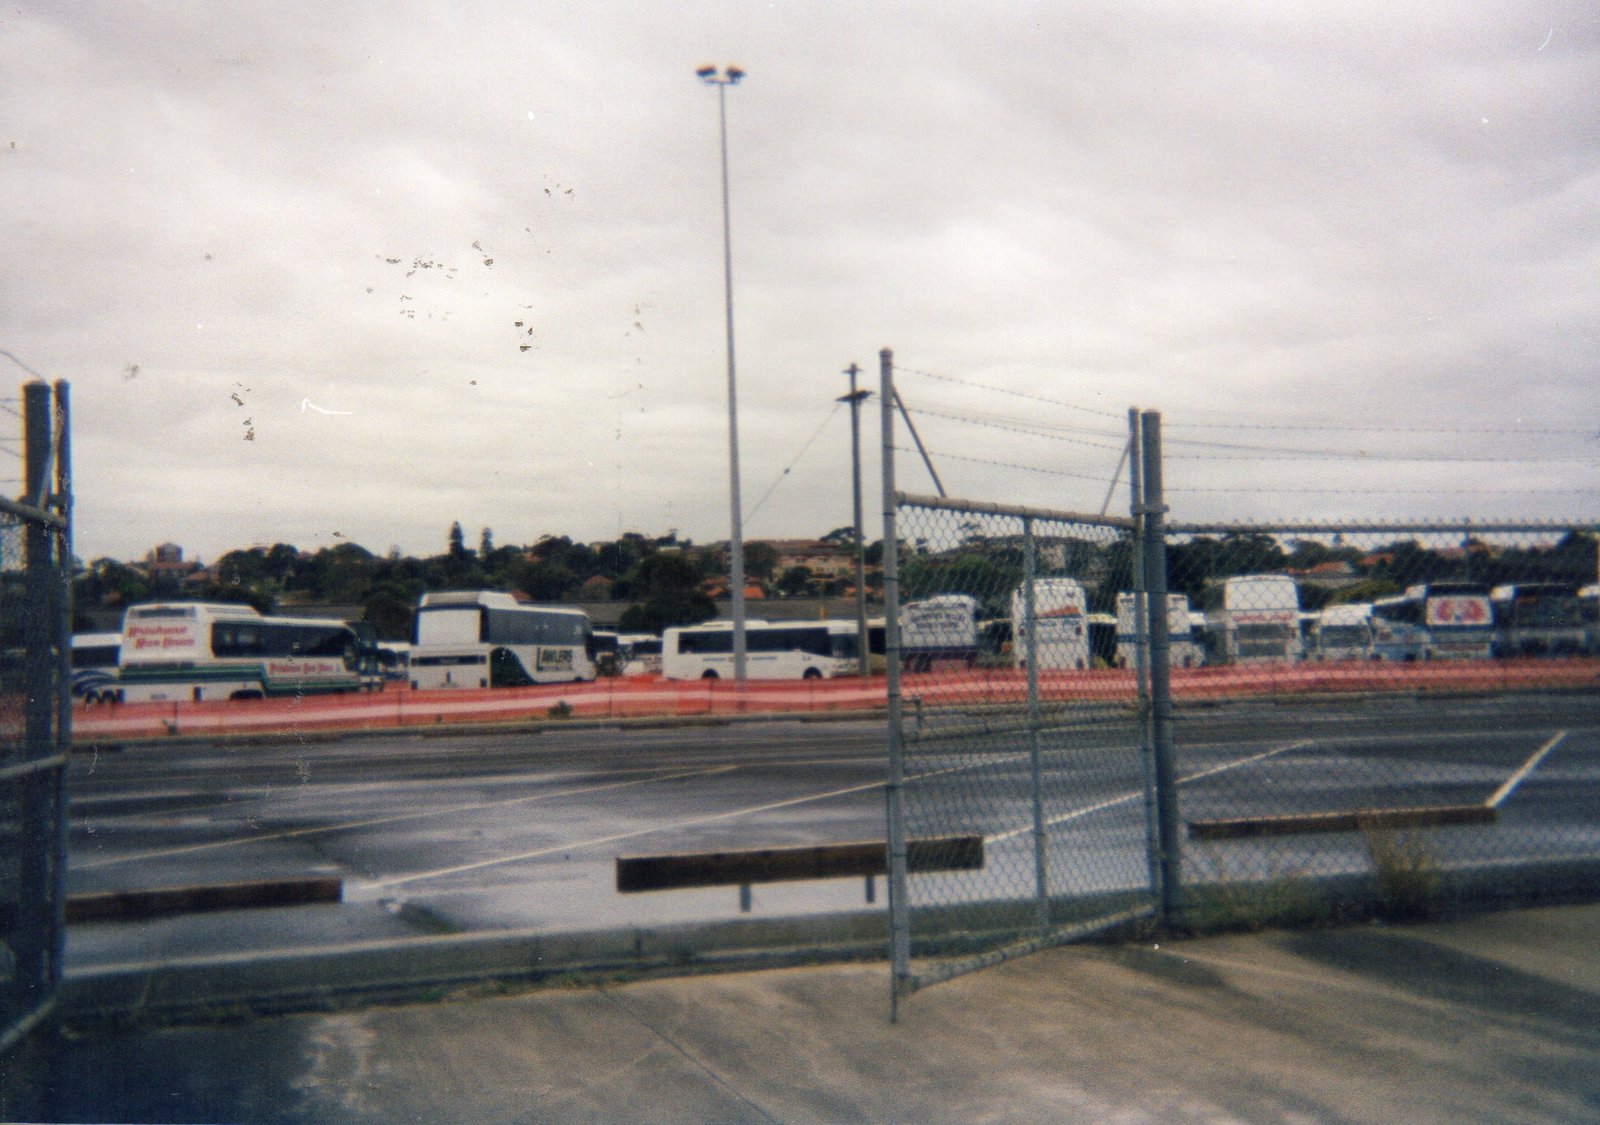 051 Driving buses in Sydney for the olympics 2000.jpg